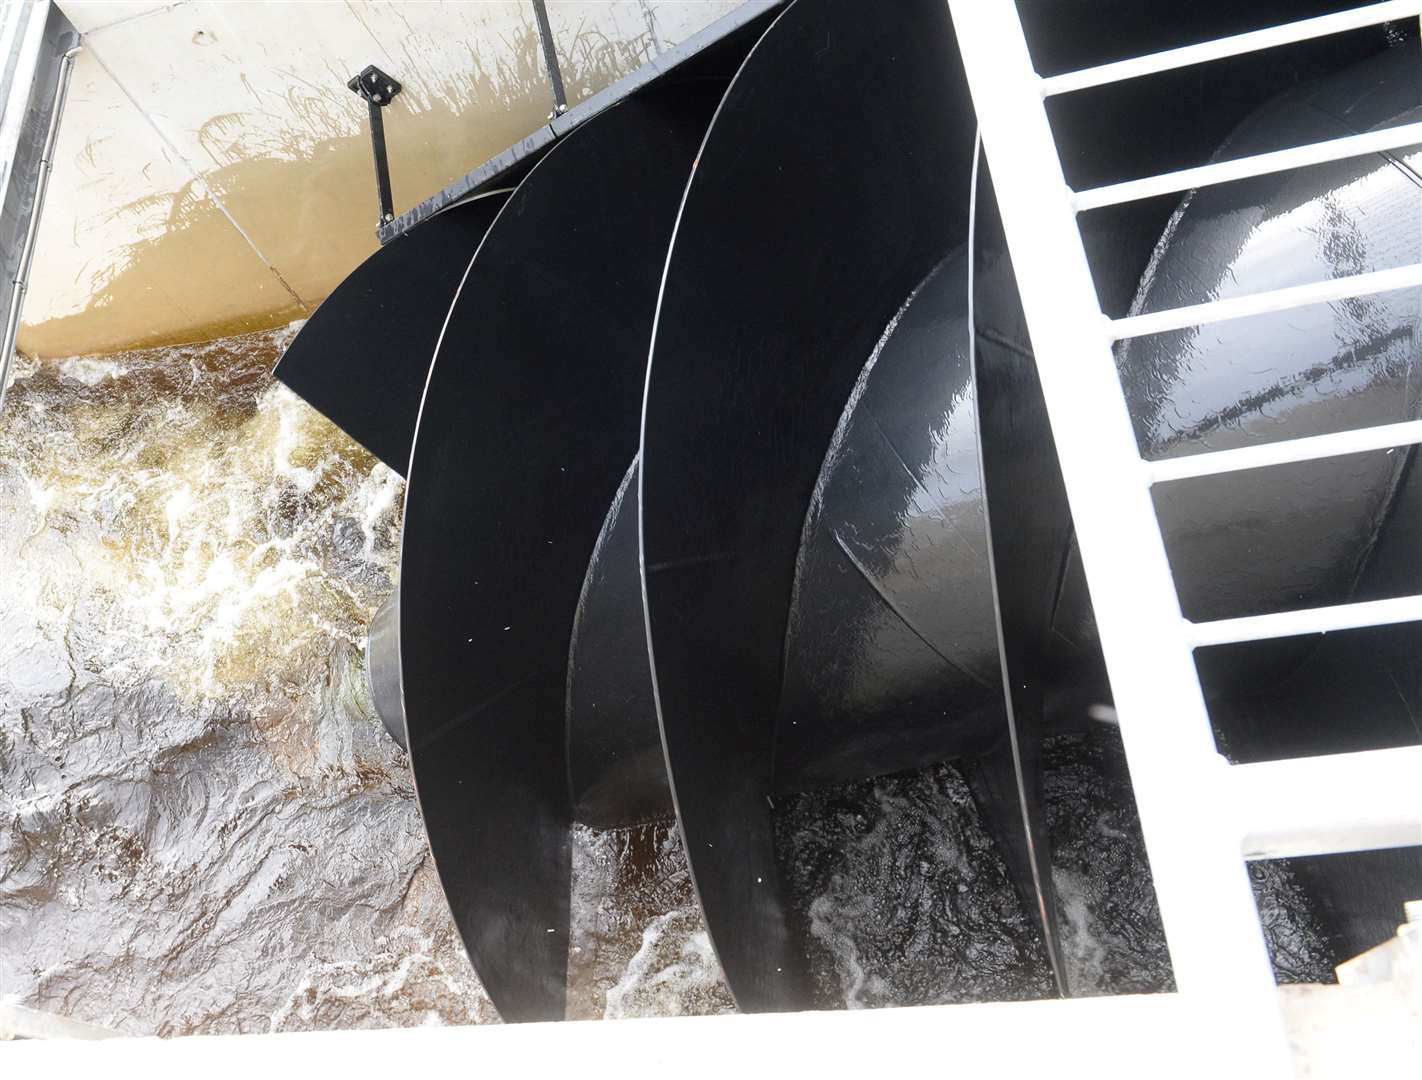 Visitors of all ages to Hydro Ness will be able to see how the power of the River Ness is used to produce green energy.